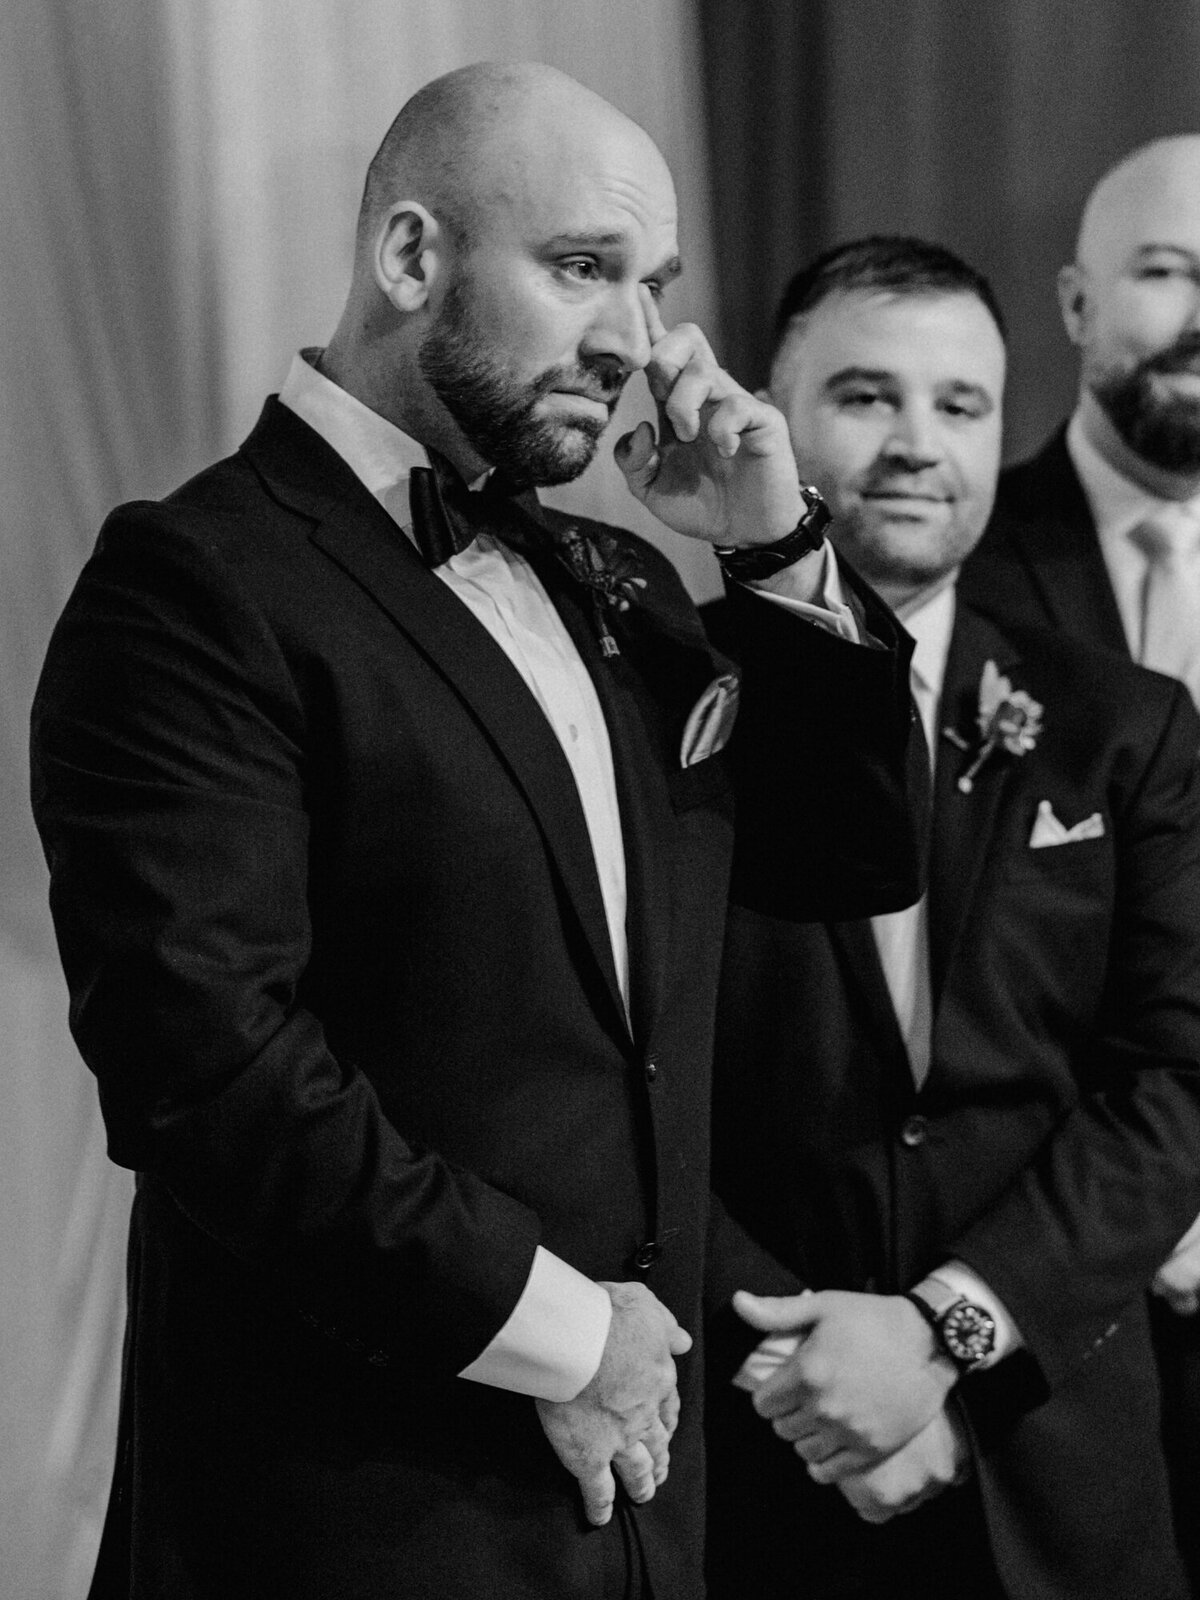 A groom sheds a tear during a wedding ceremony in Chicago